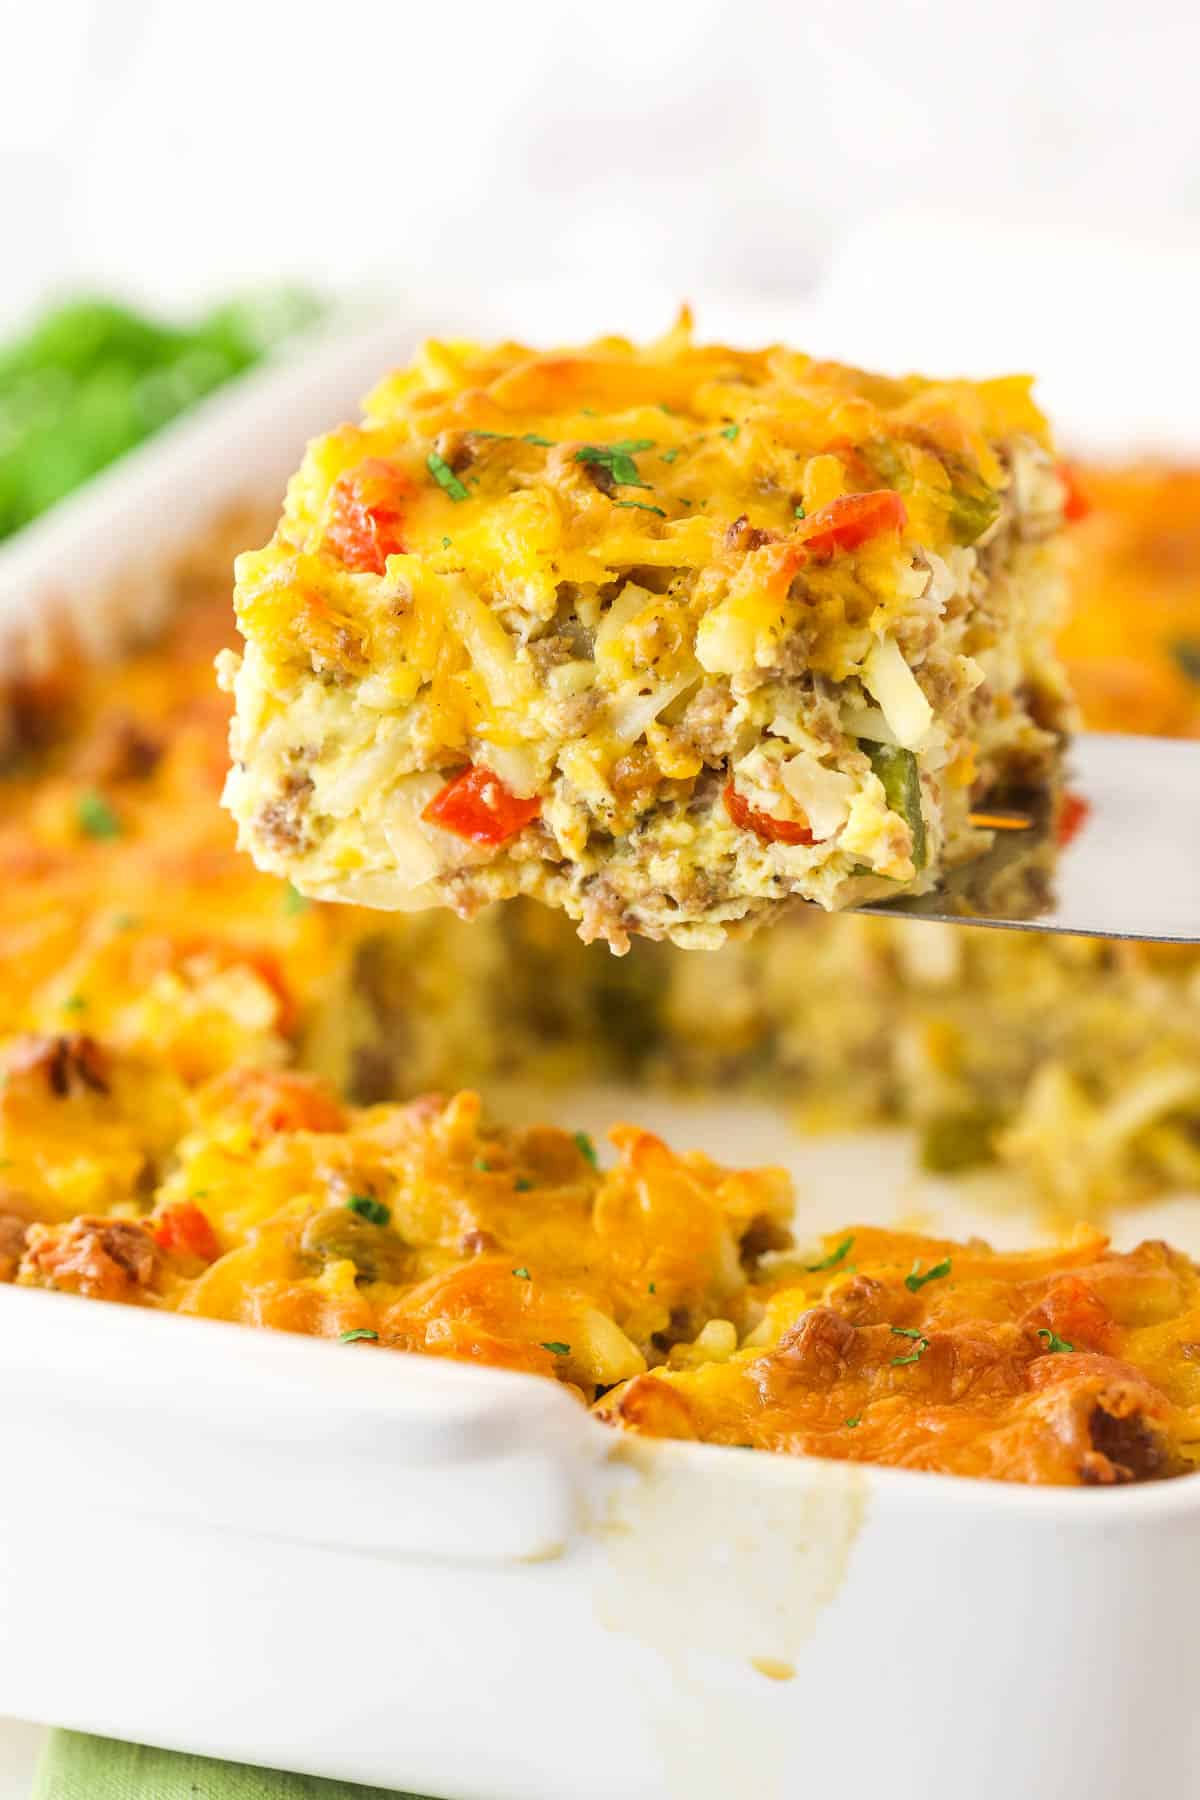 A piece of hashbrown breakfast casserole being lifted out of the baking dish